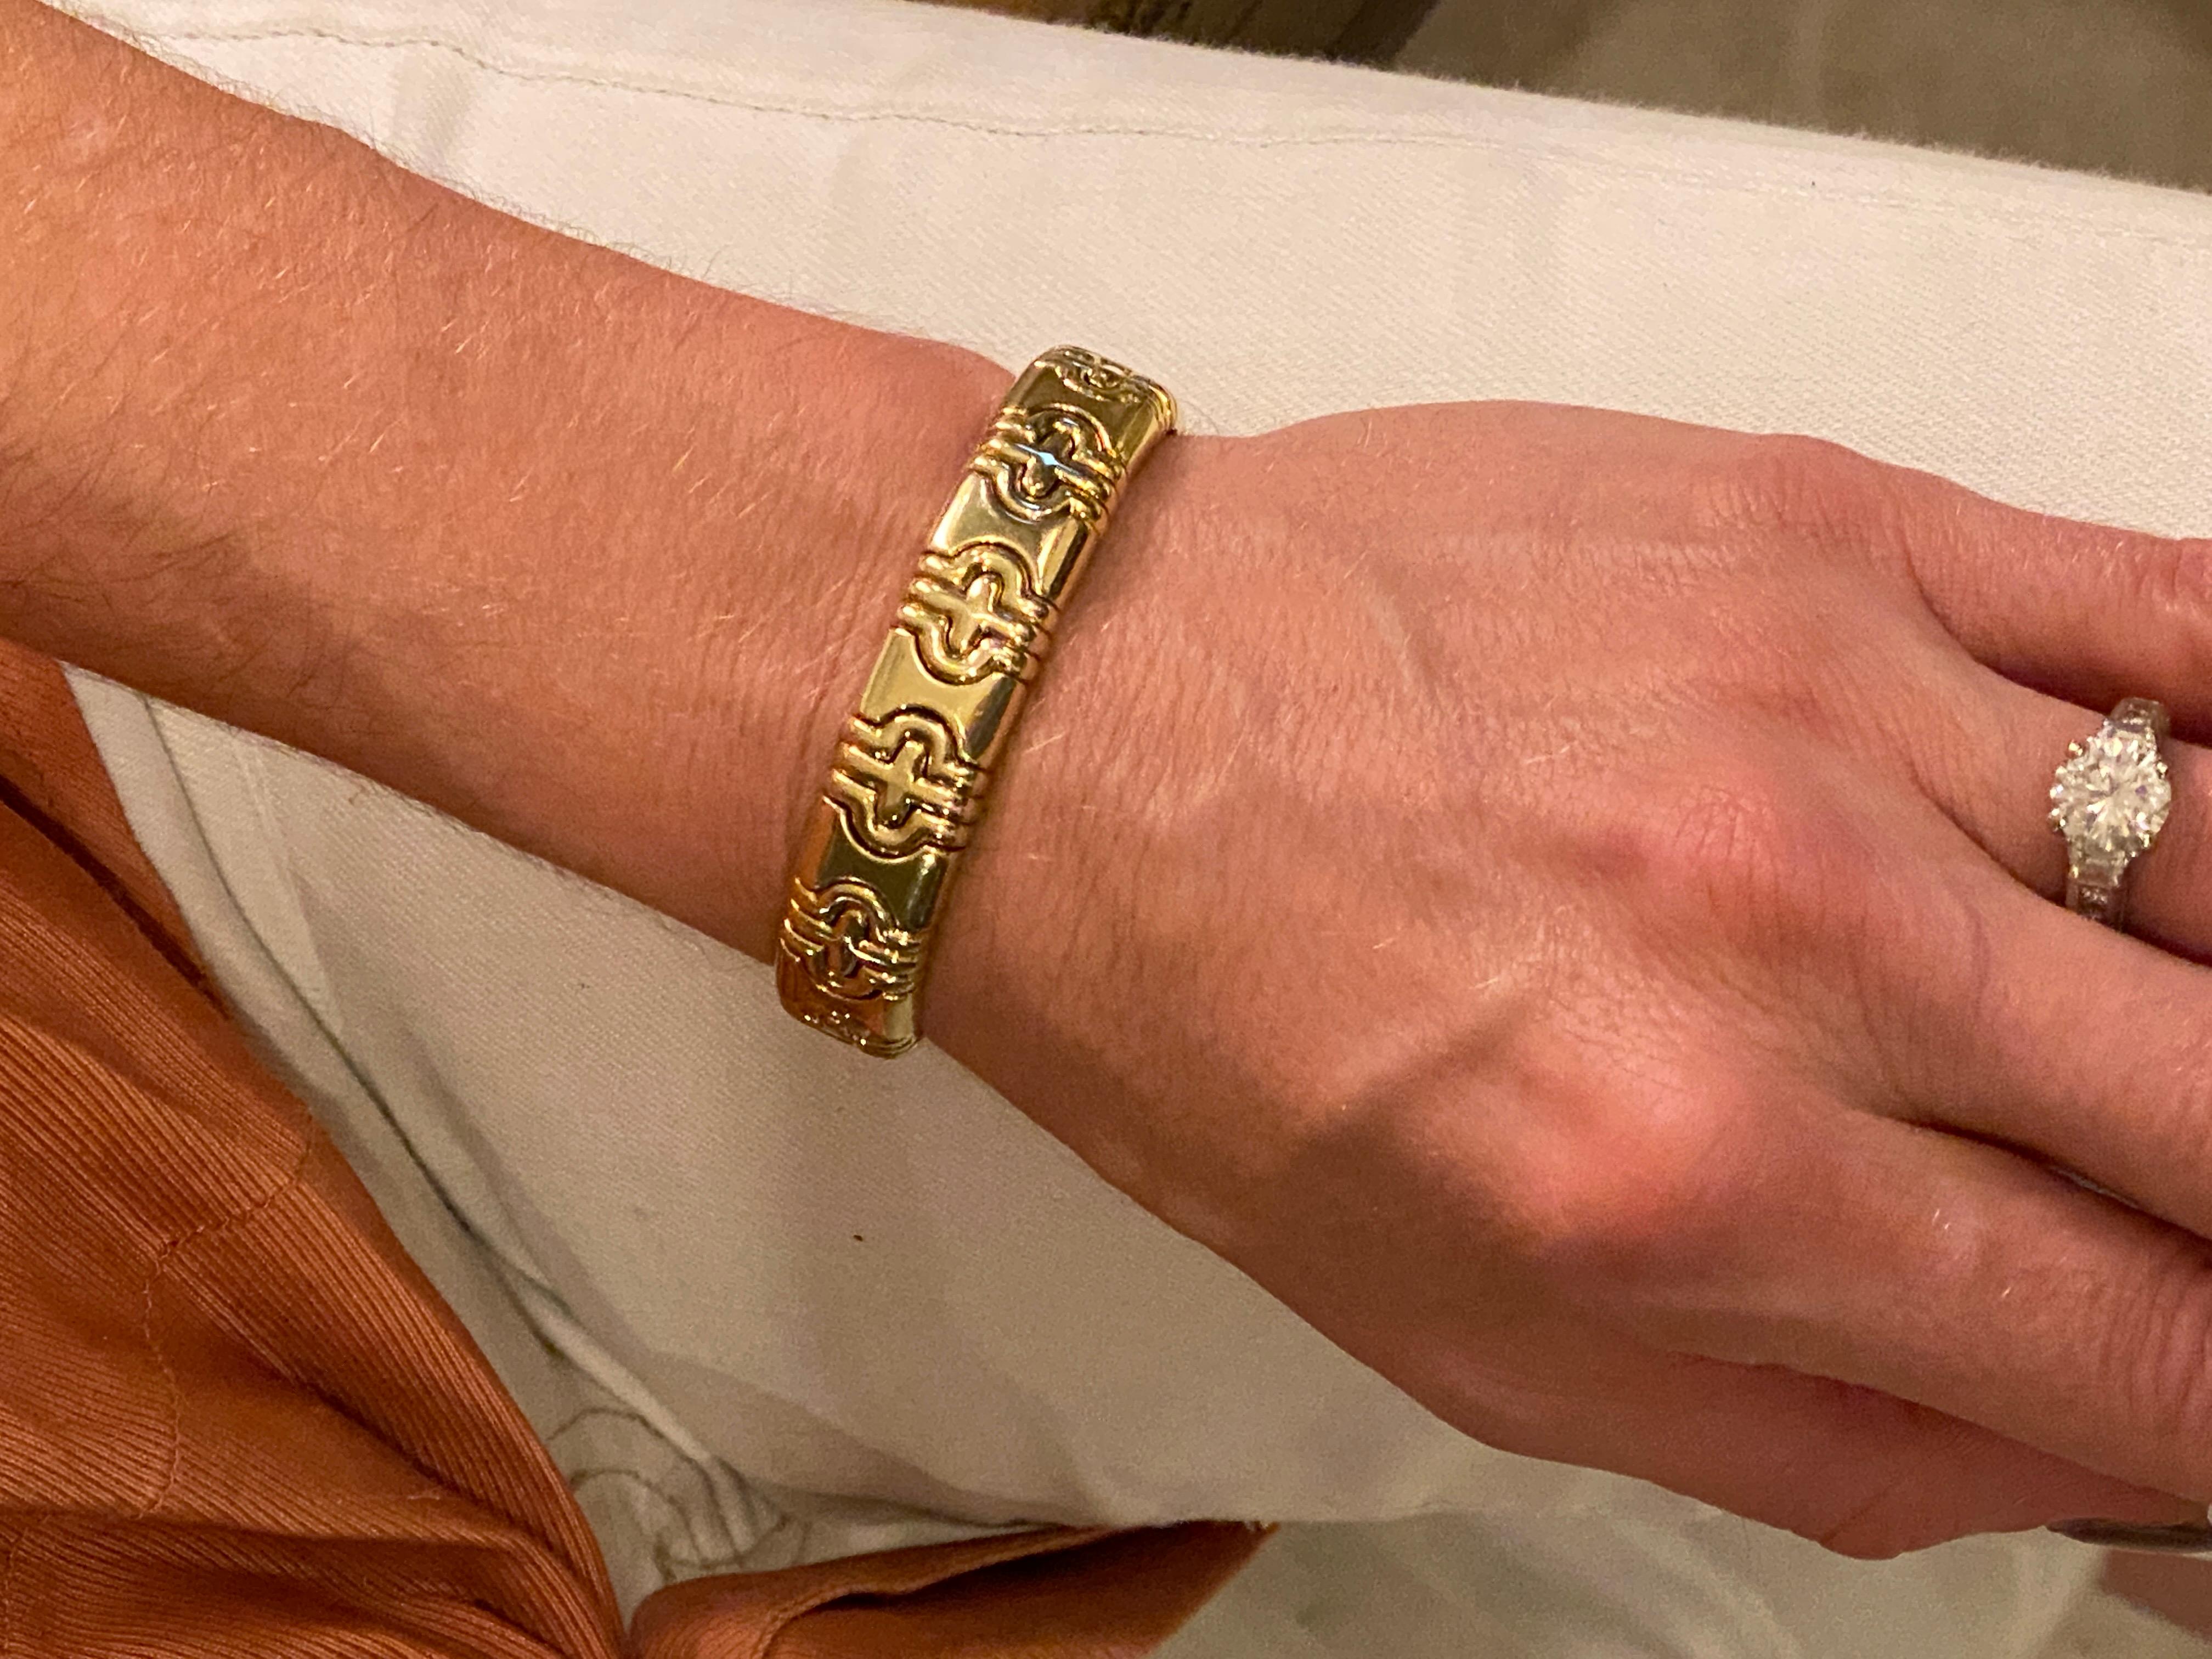 Fabulous vintage Bvlgari cuff bracelet fashioned in solid 18 karat yellow gold. The bracelet is part of the Parentesi collection circa 1980's. The cuff is for a small wrist measuring 2.0 inches in diameter, and approximately 6.5 inches in